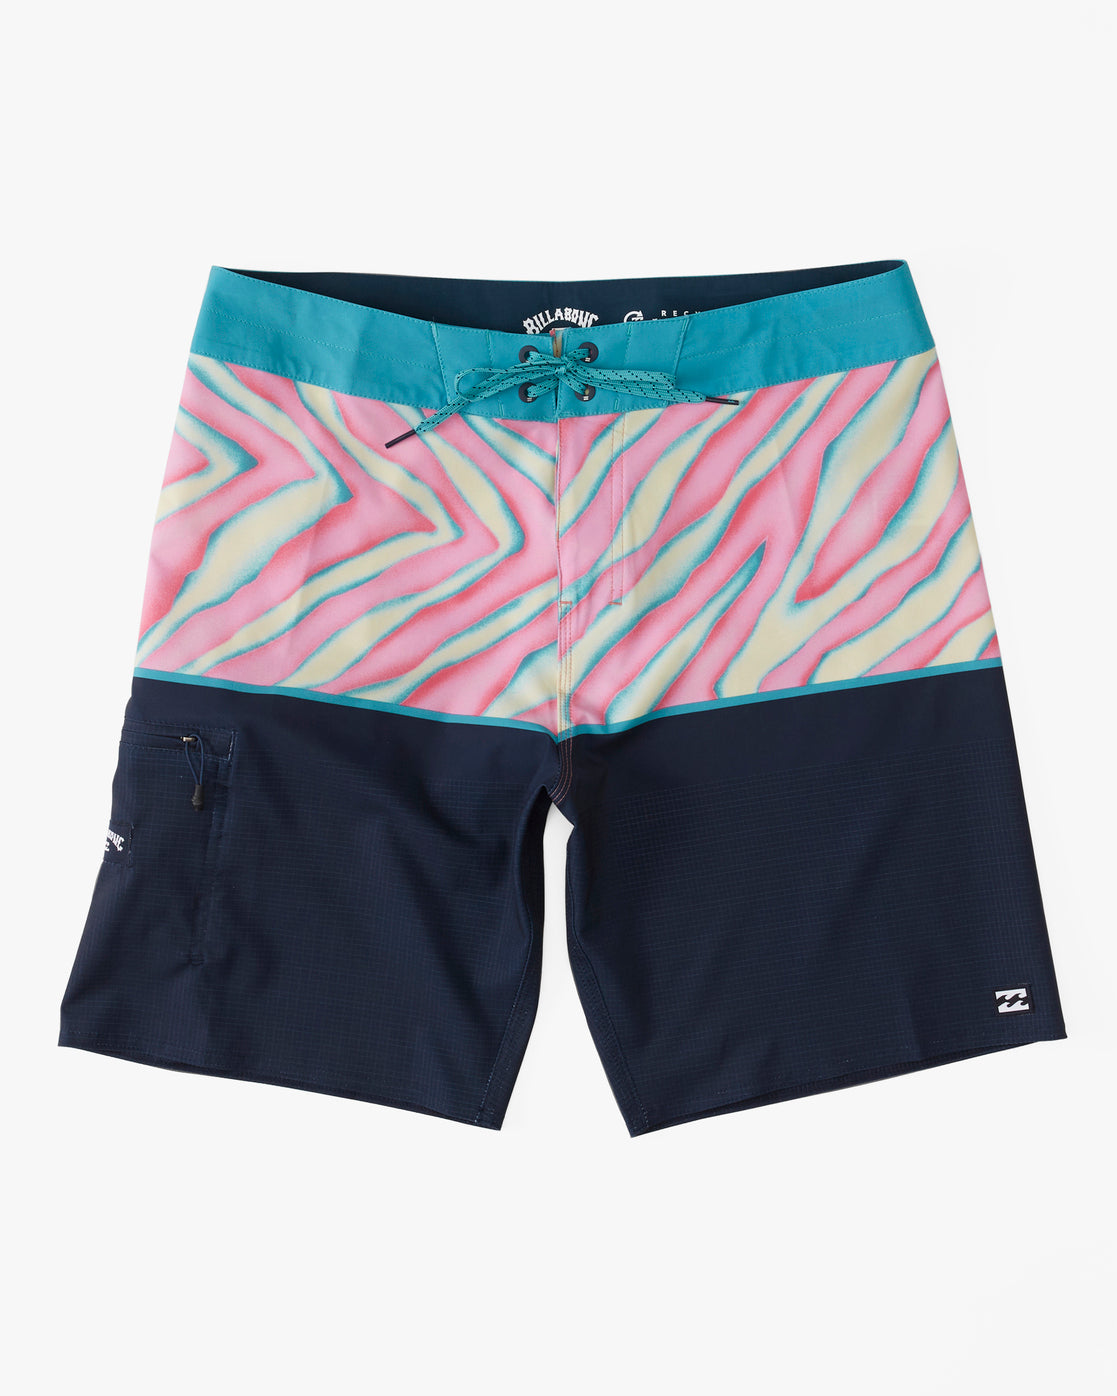 FIFTY 50 AIRLITE SHORTS - ABYBS00383